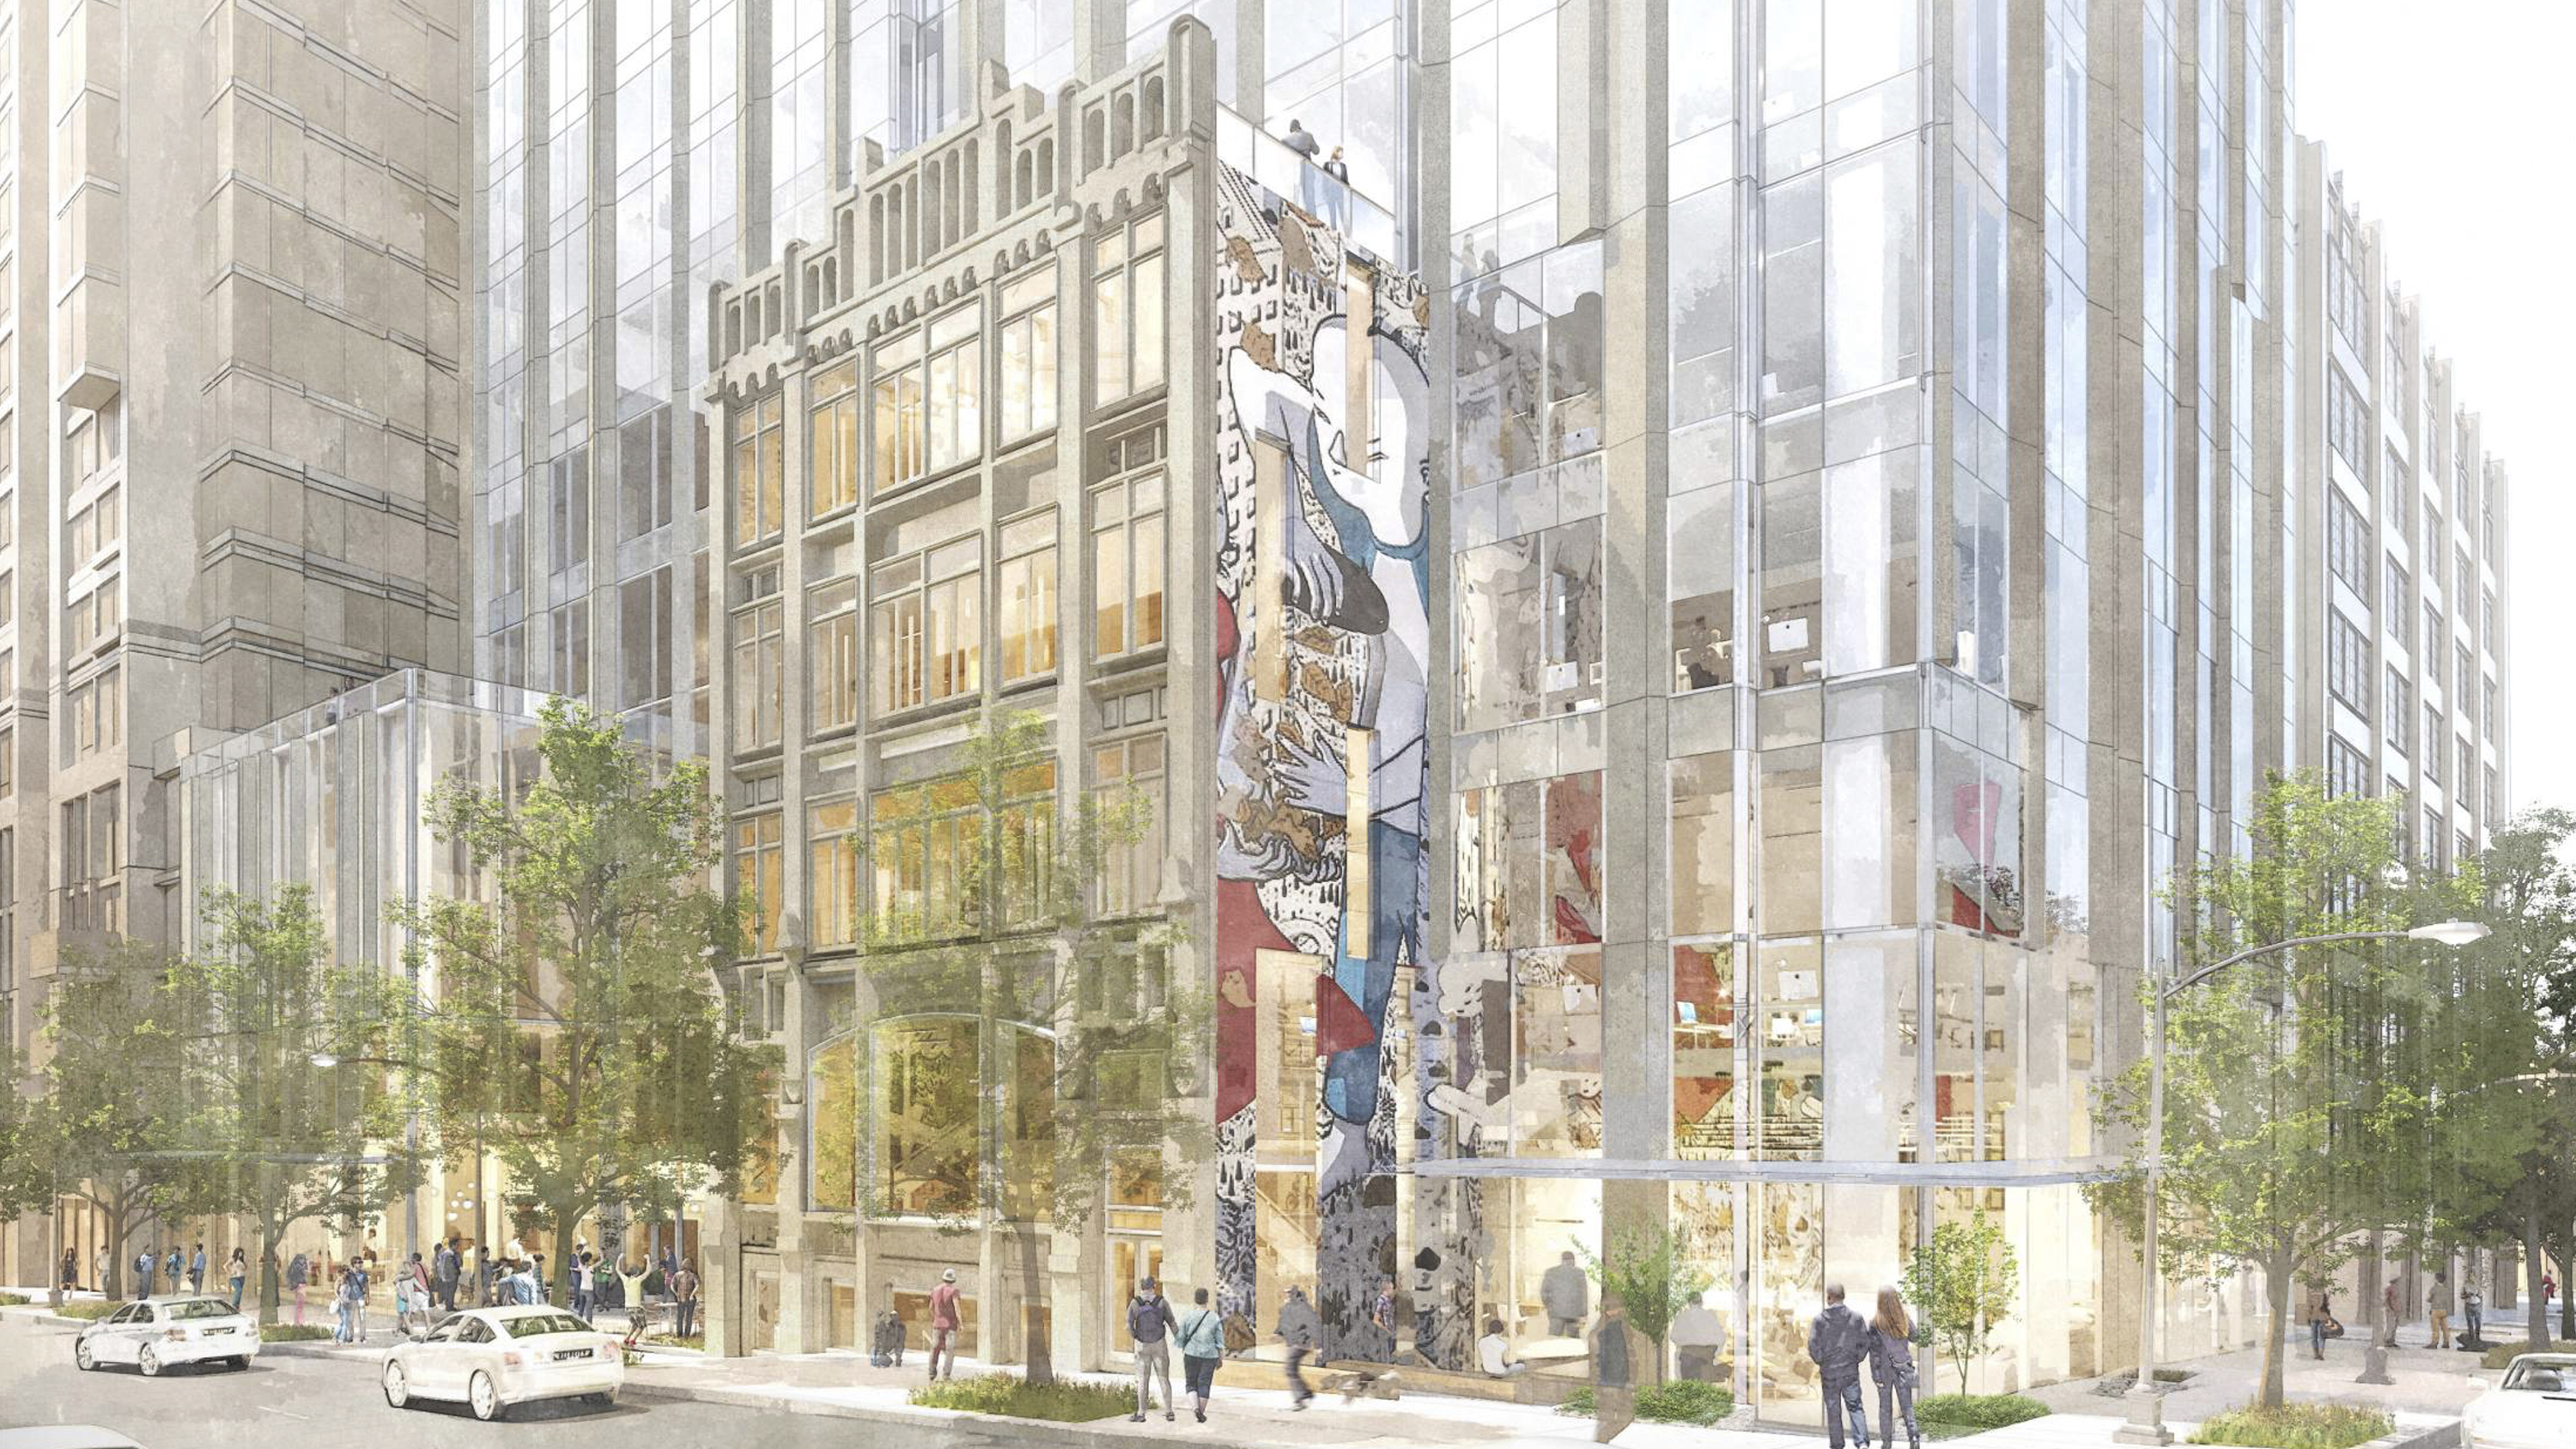 Downtown Seattle Design Review Roundup - July 2019